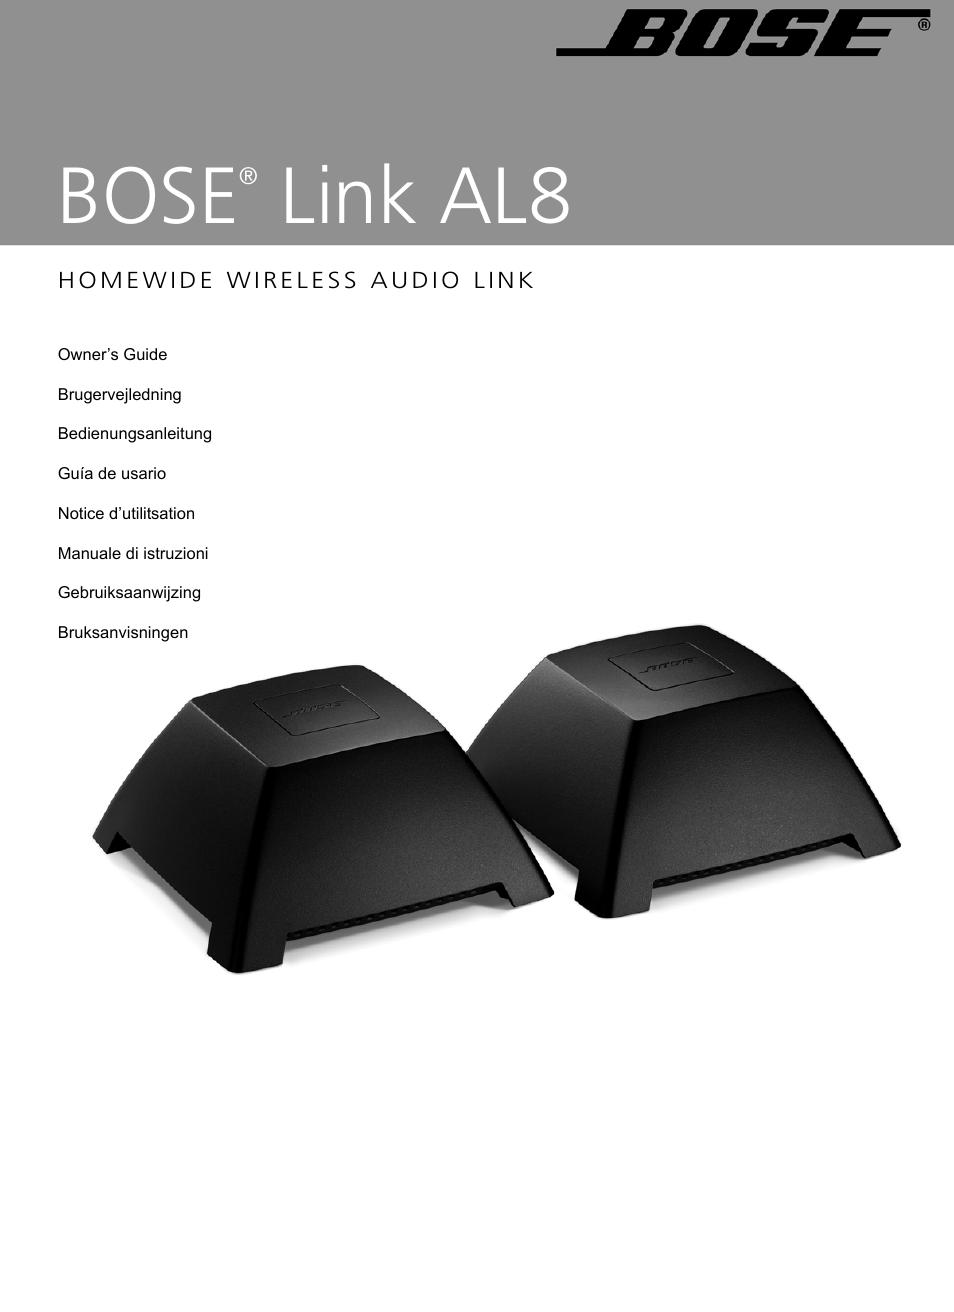 Bose Homewide Wireless Audio Link Link AL8 User Manual | 14 pages